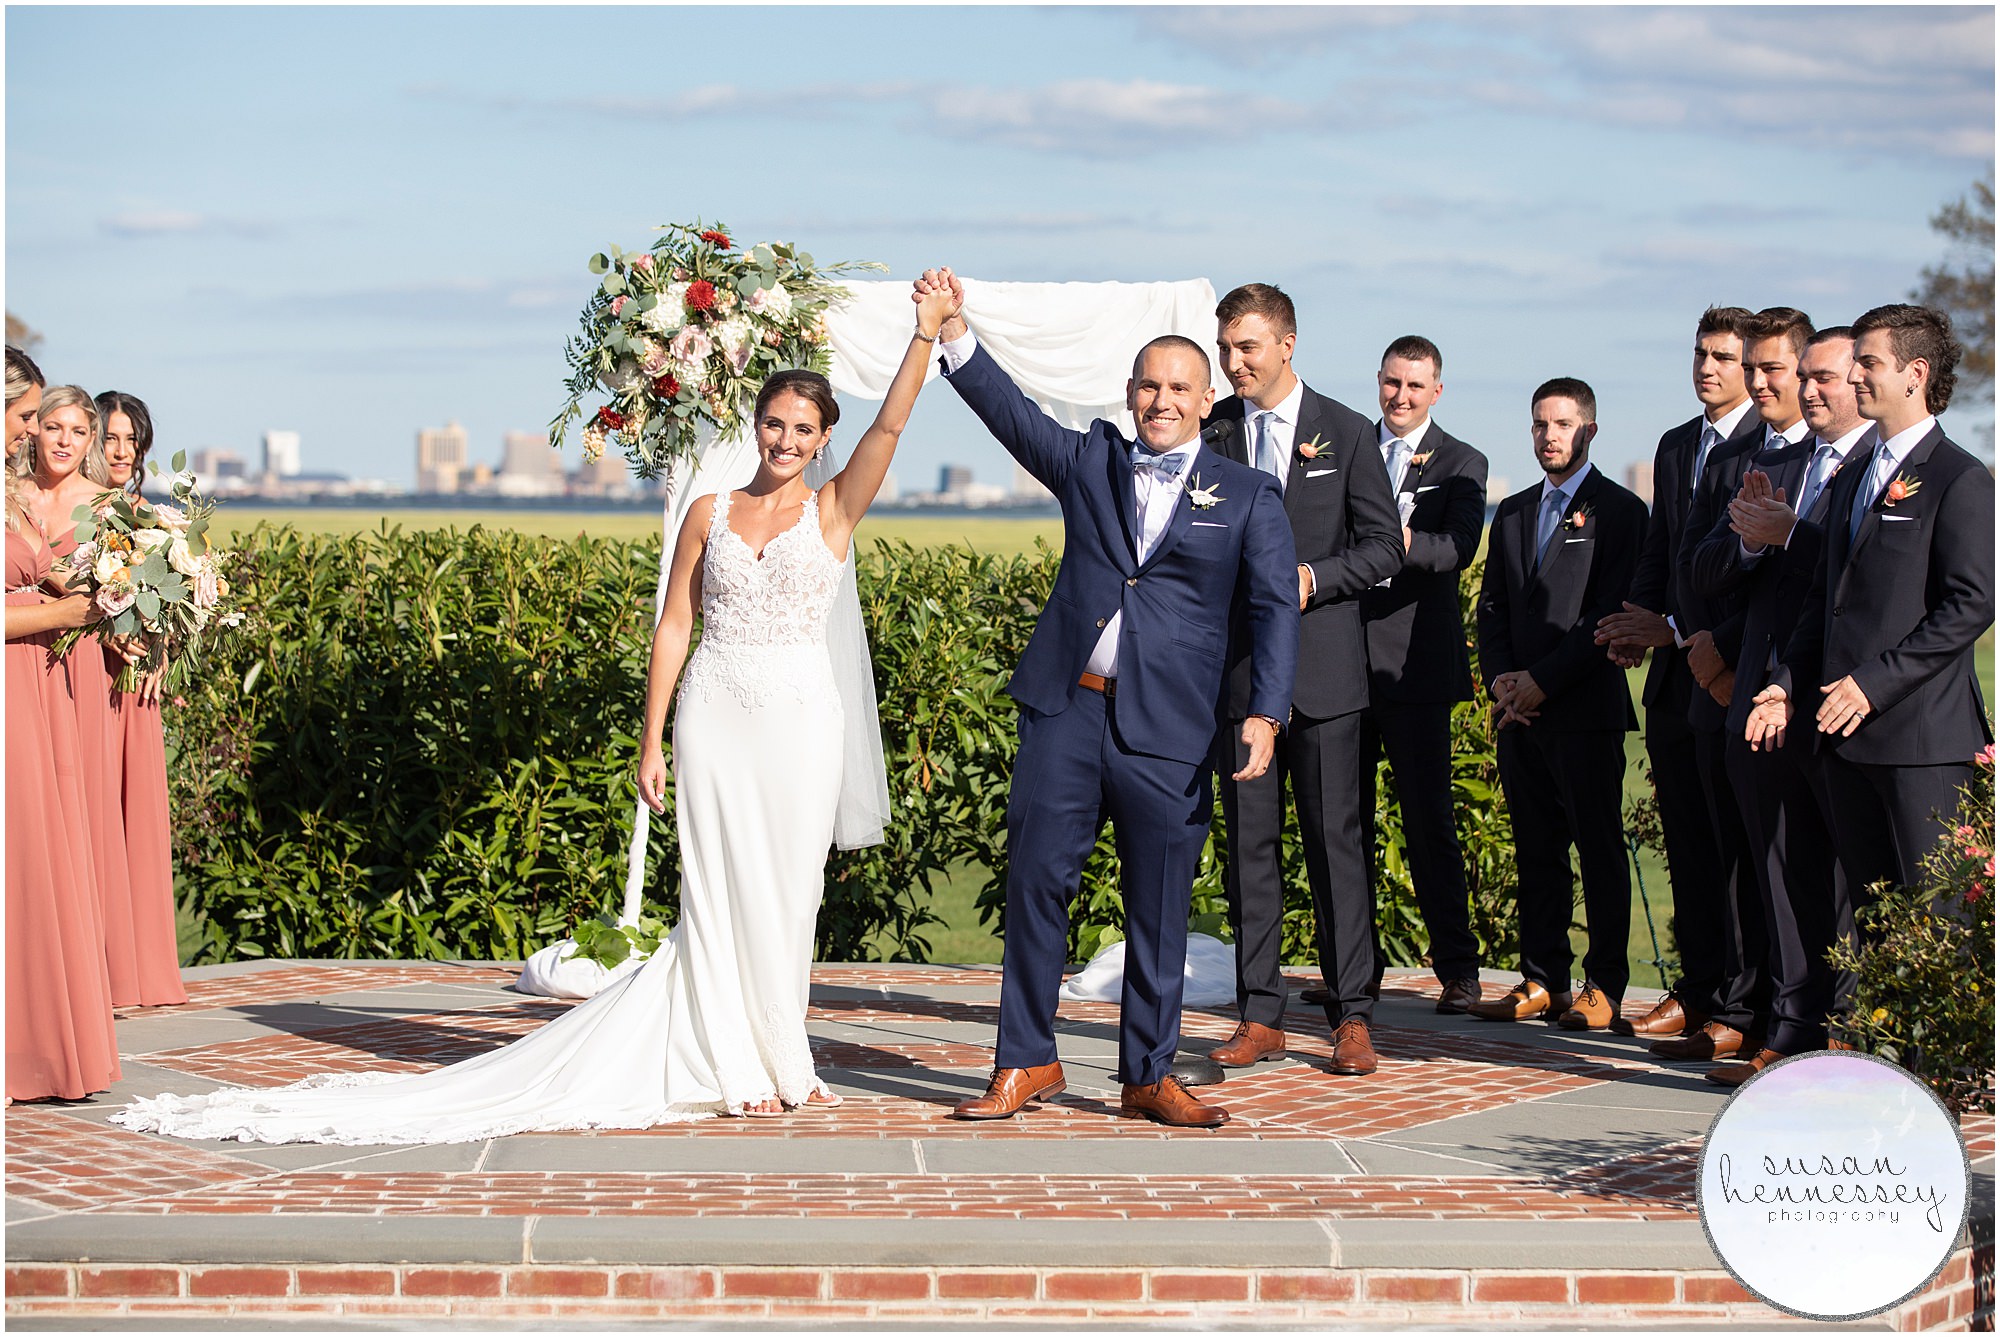 Susan Hennessey Photography Best of 2020 Weddings - Outdoor ceremony at Atlantic City Country Club wedding